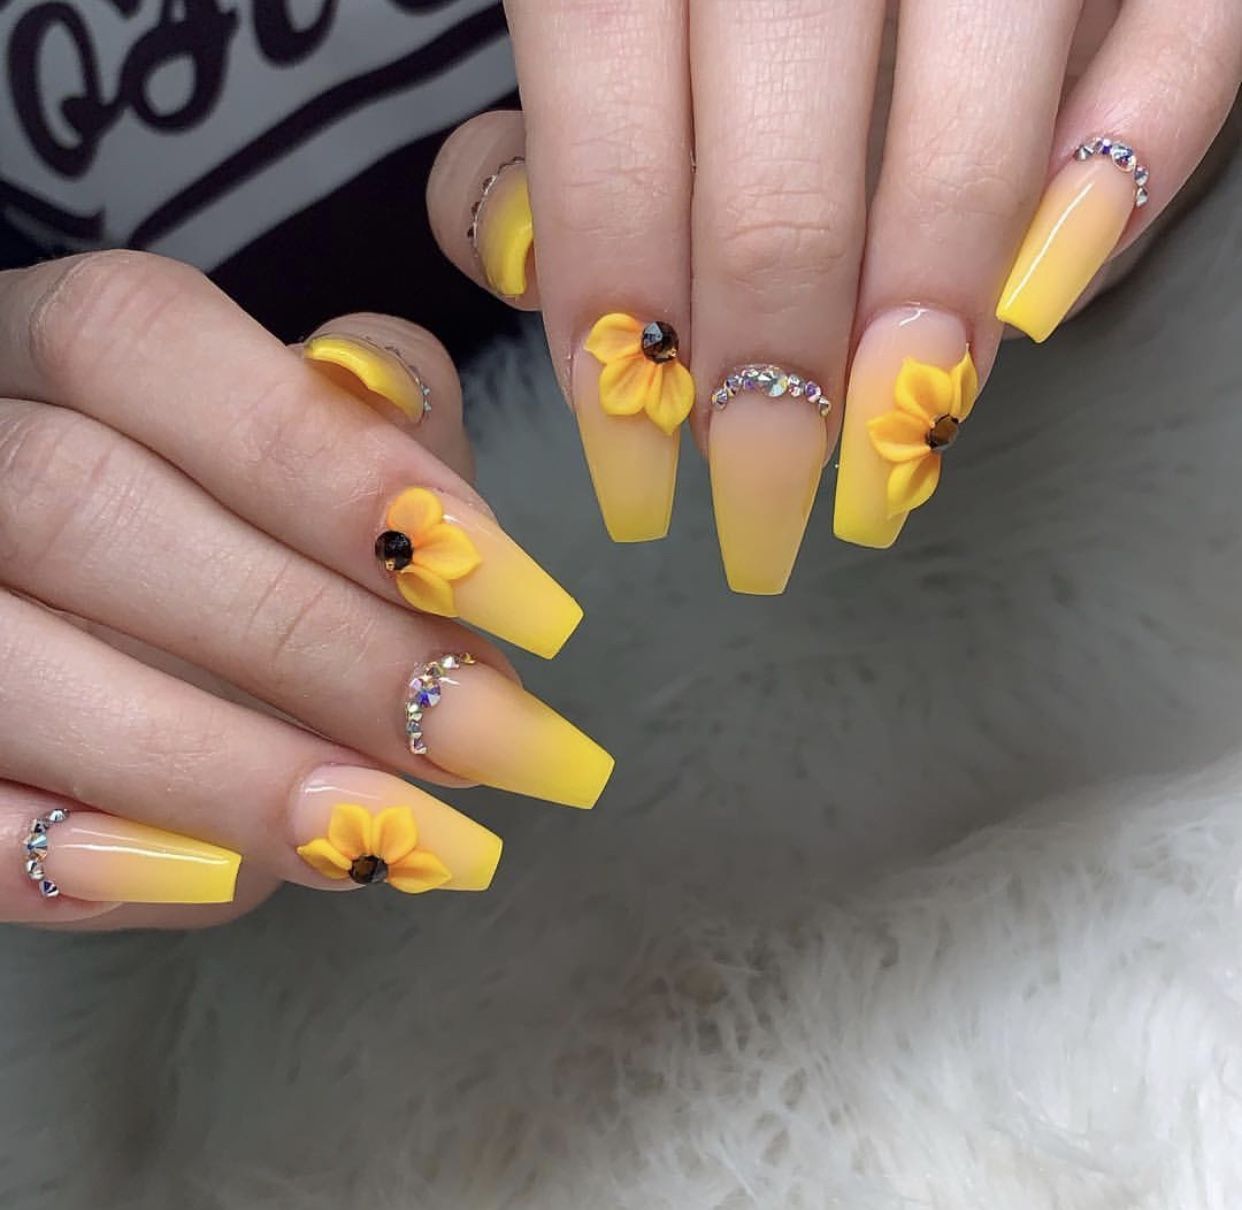 sunflower. 3 90+ Hottest 3D Acrylic Nails With Flower Designs - 41 3D acrylic nails with flower designs